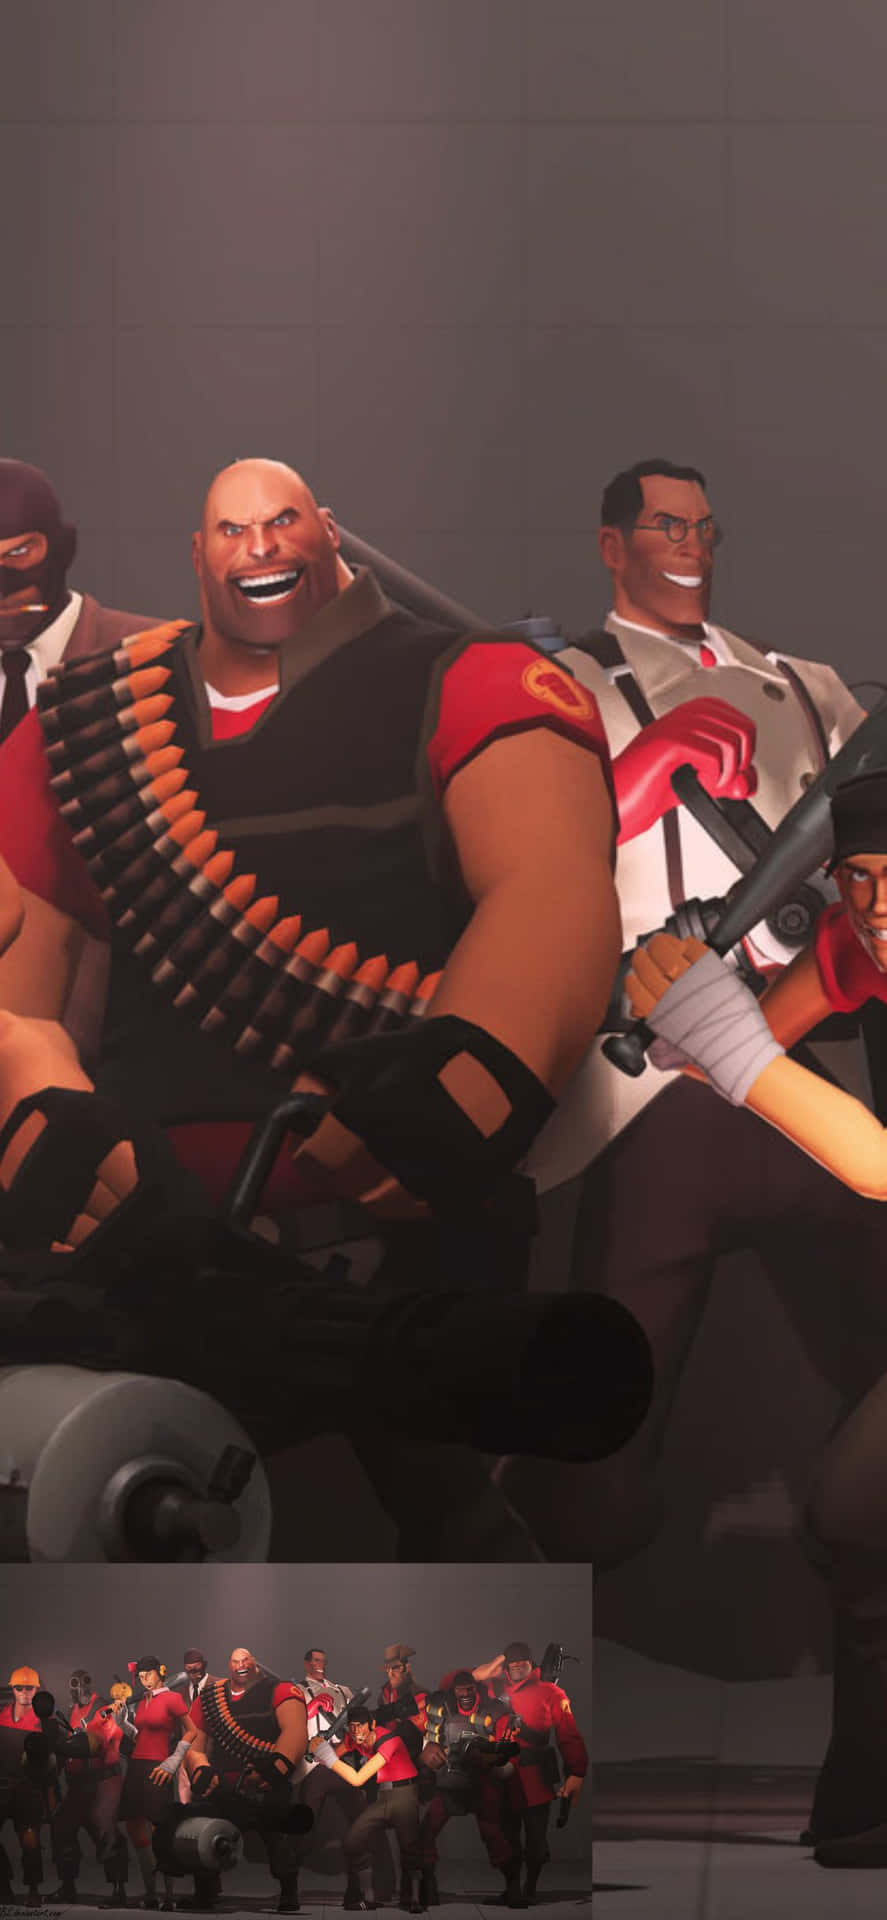 Spelateam Fortress 2 På Din Iphone Xs.